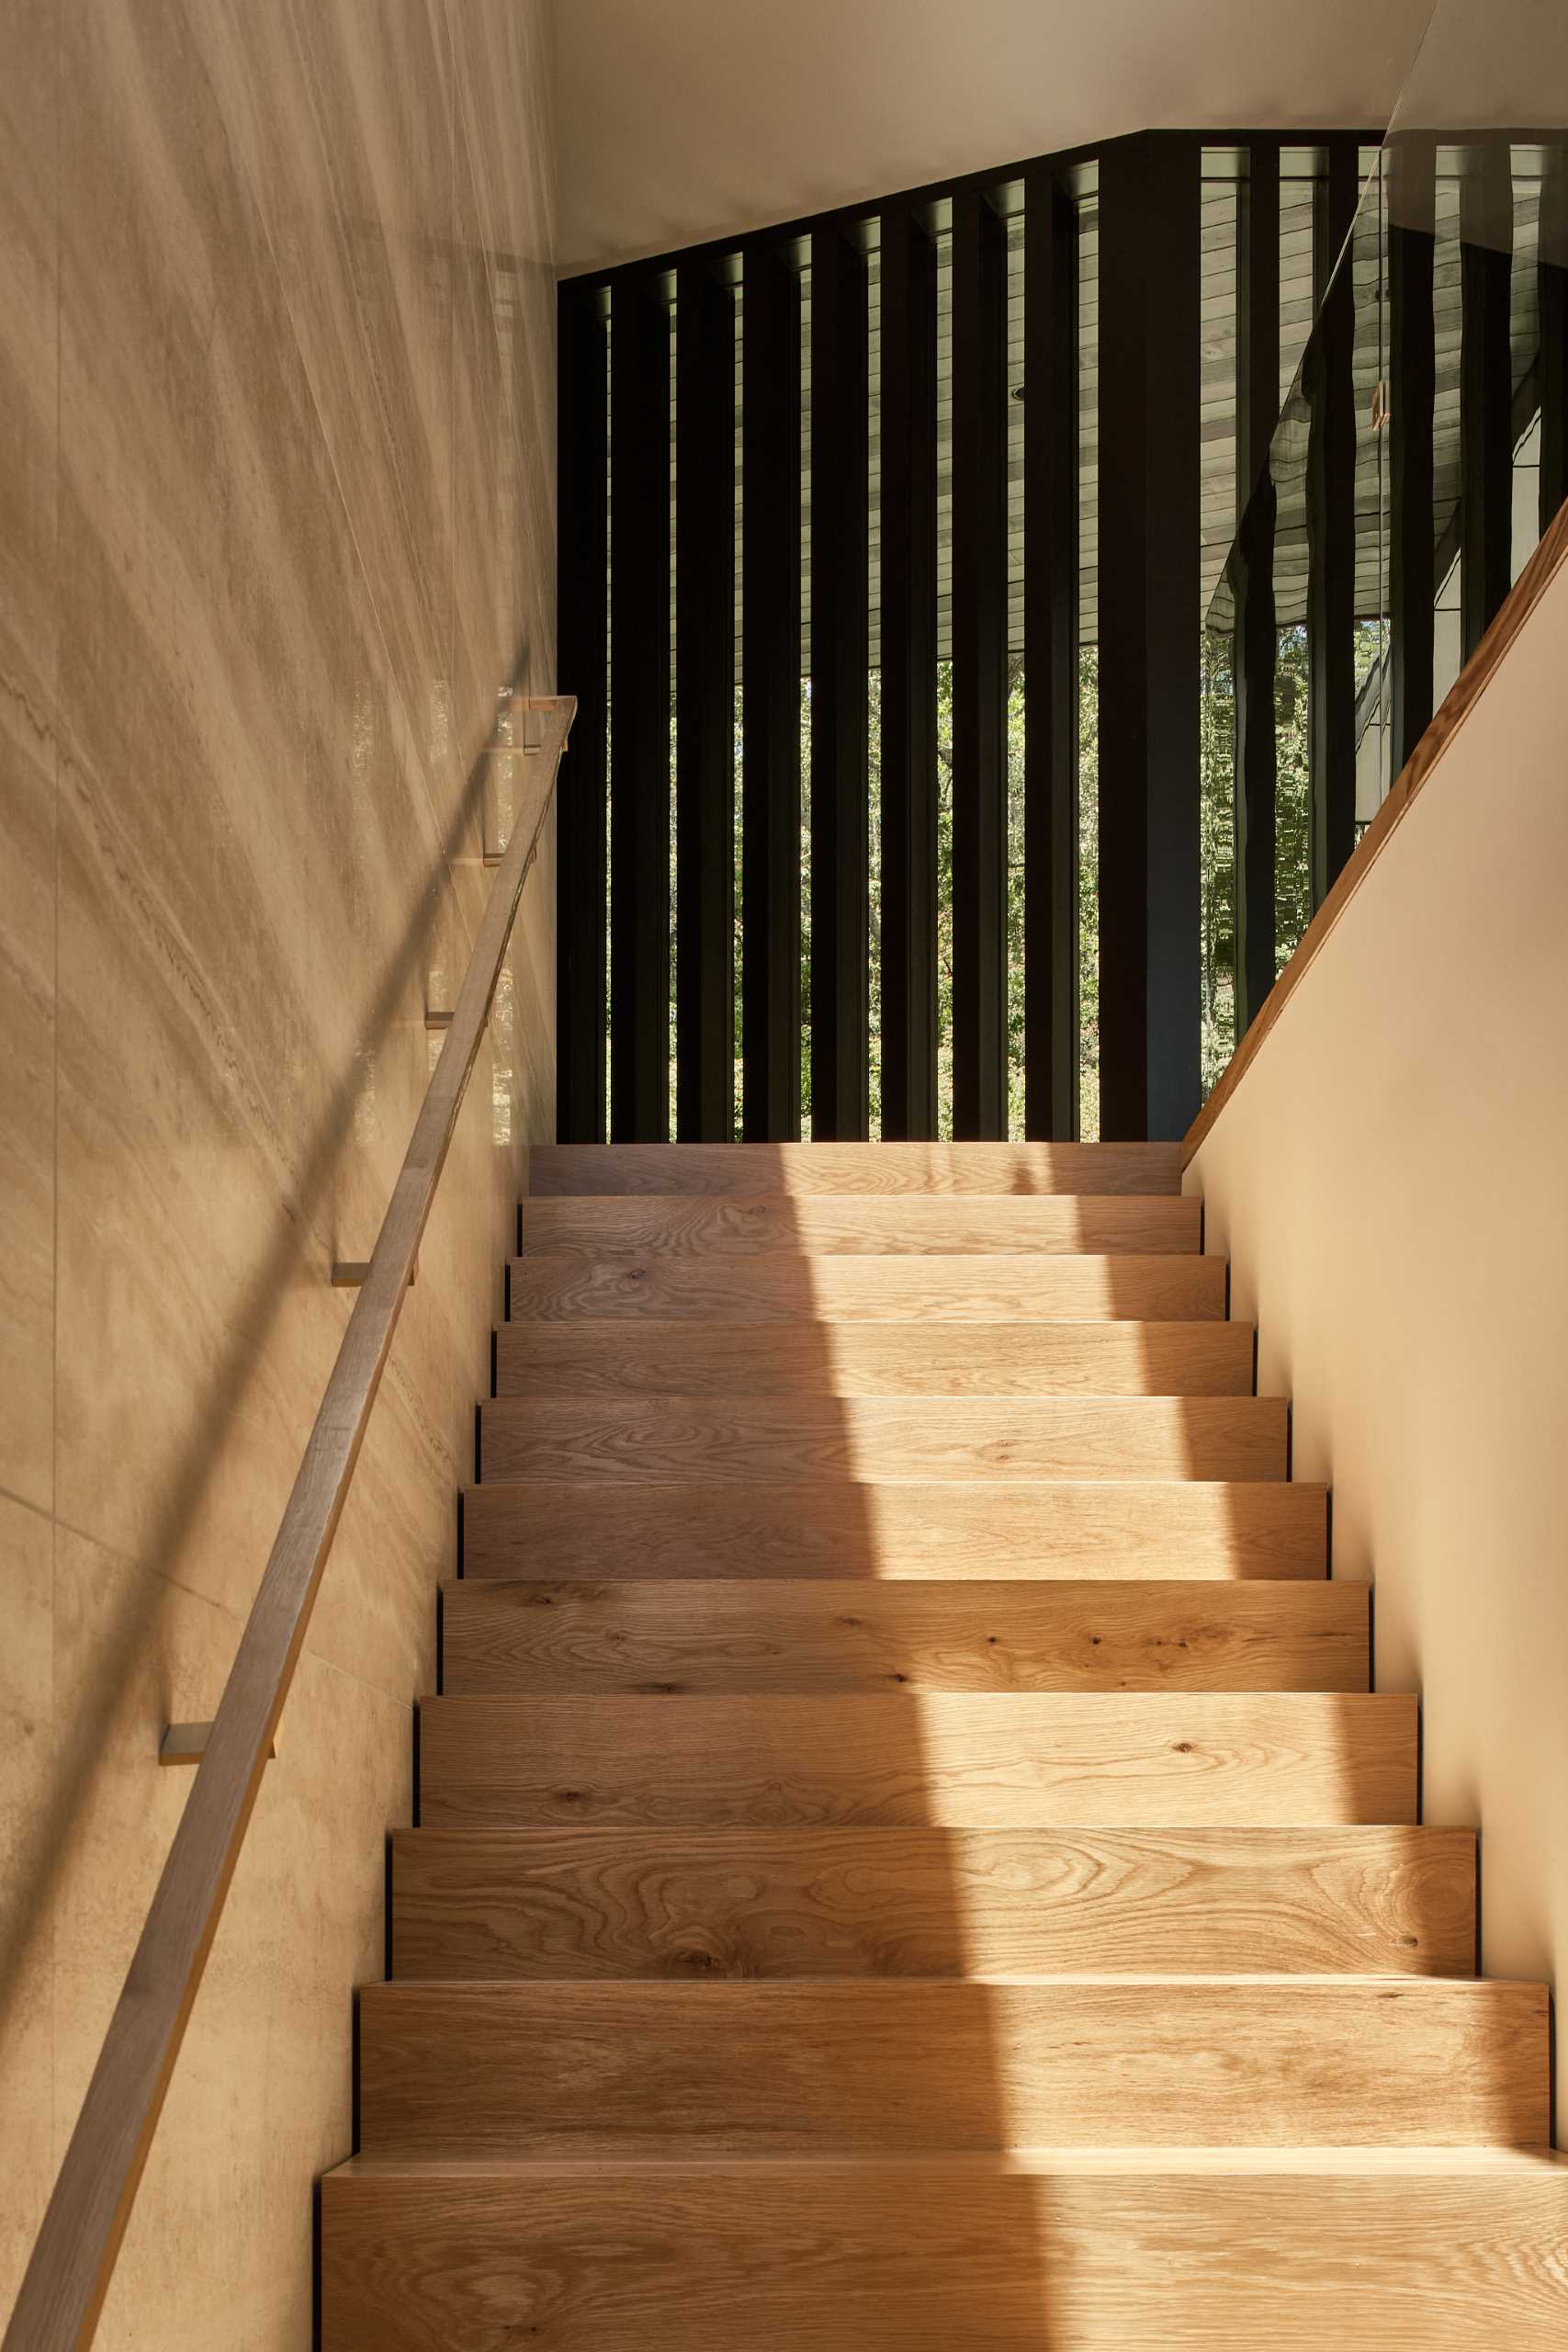 A Travertine wall runs alongside wood stairs that lead to the upper level of the ،me.